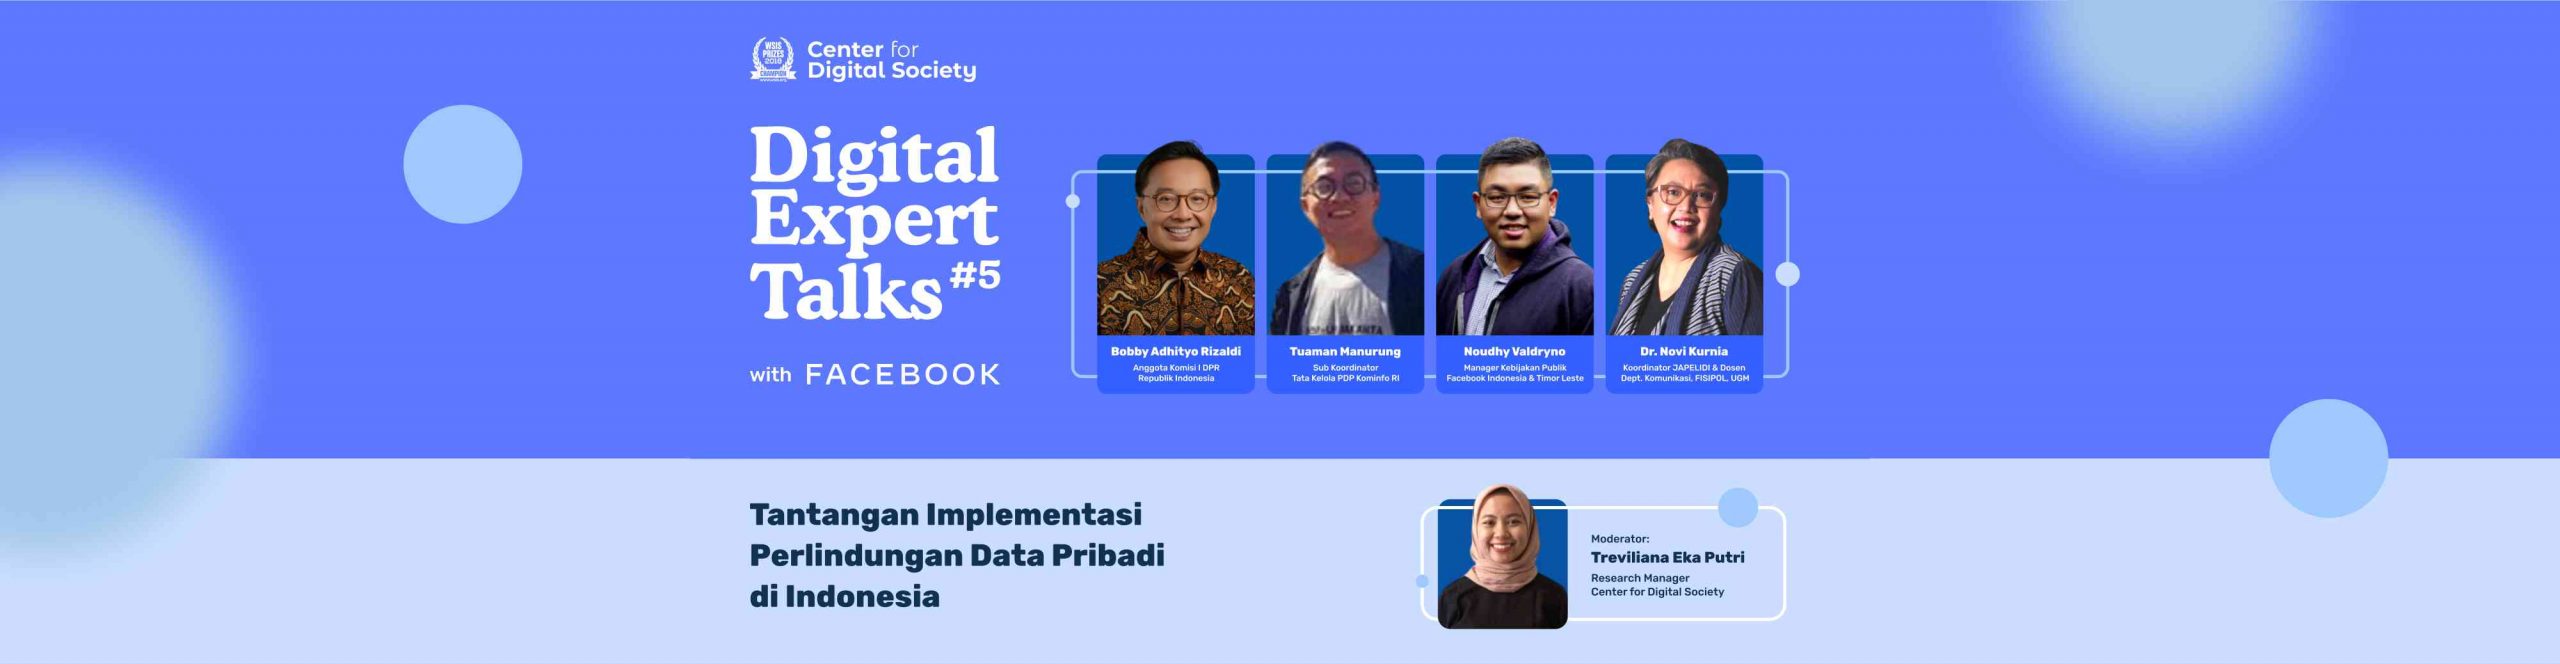 [PRESS RELEASE] The Challenges of Implementing Personal Data Protection in Indonesia | Digital Expert Talks #5 with Meta